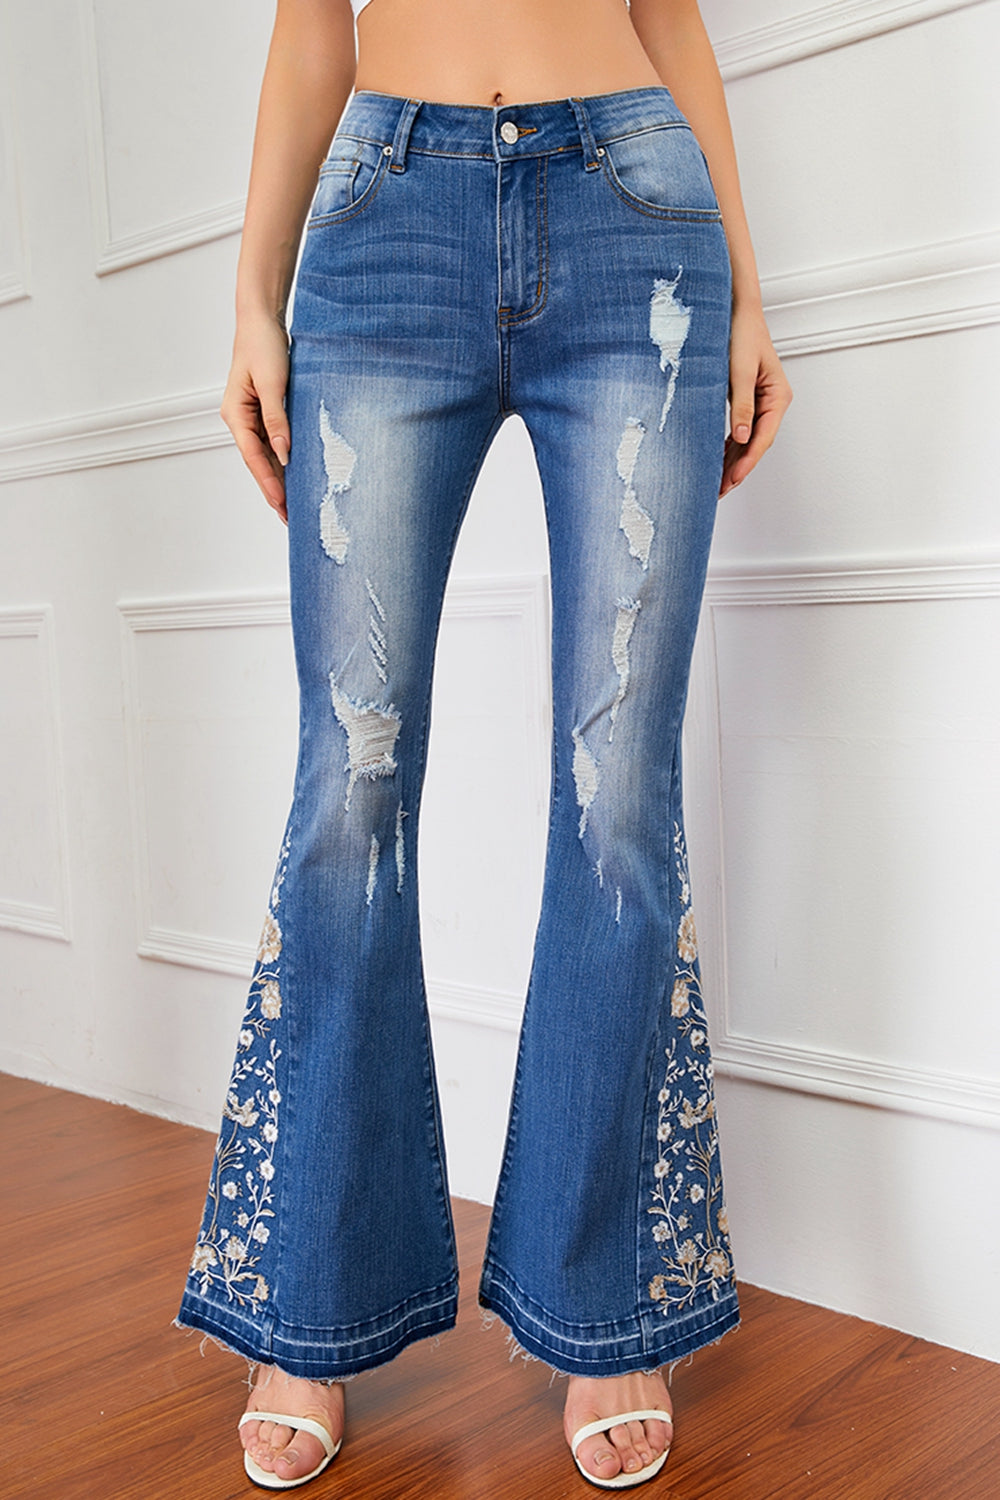 Flower Embroidery Distressed Jeans - Bottoms - Pants - 4 - 2024